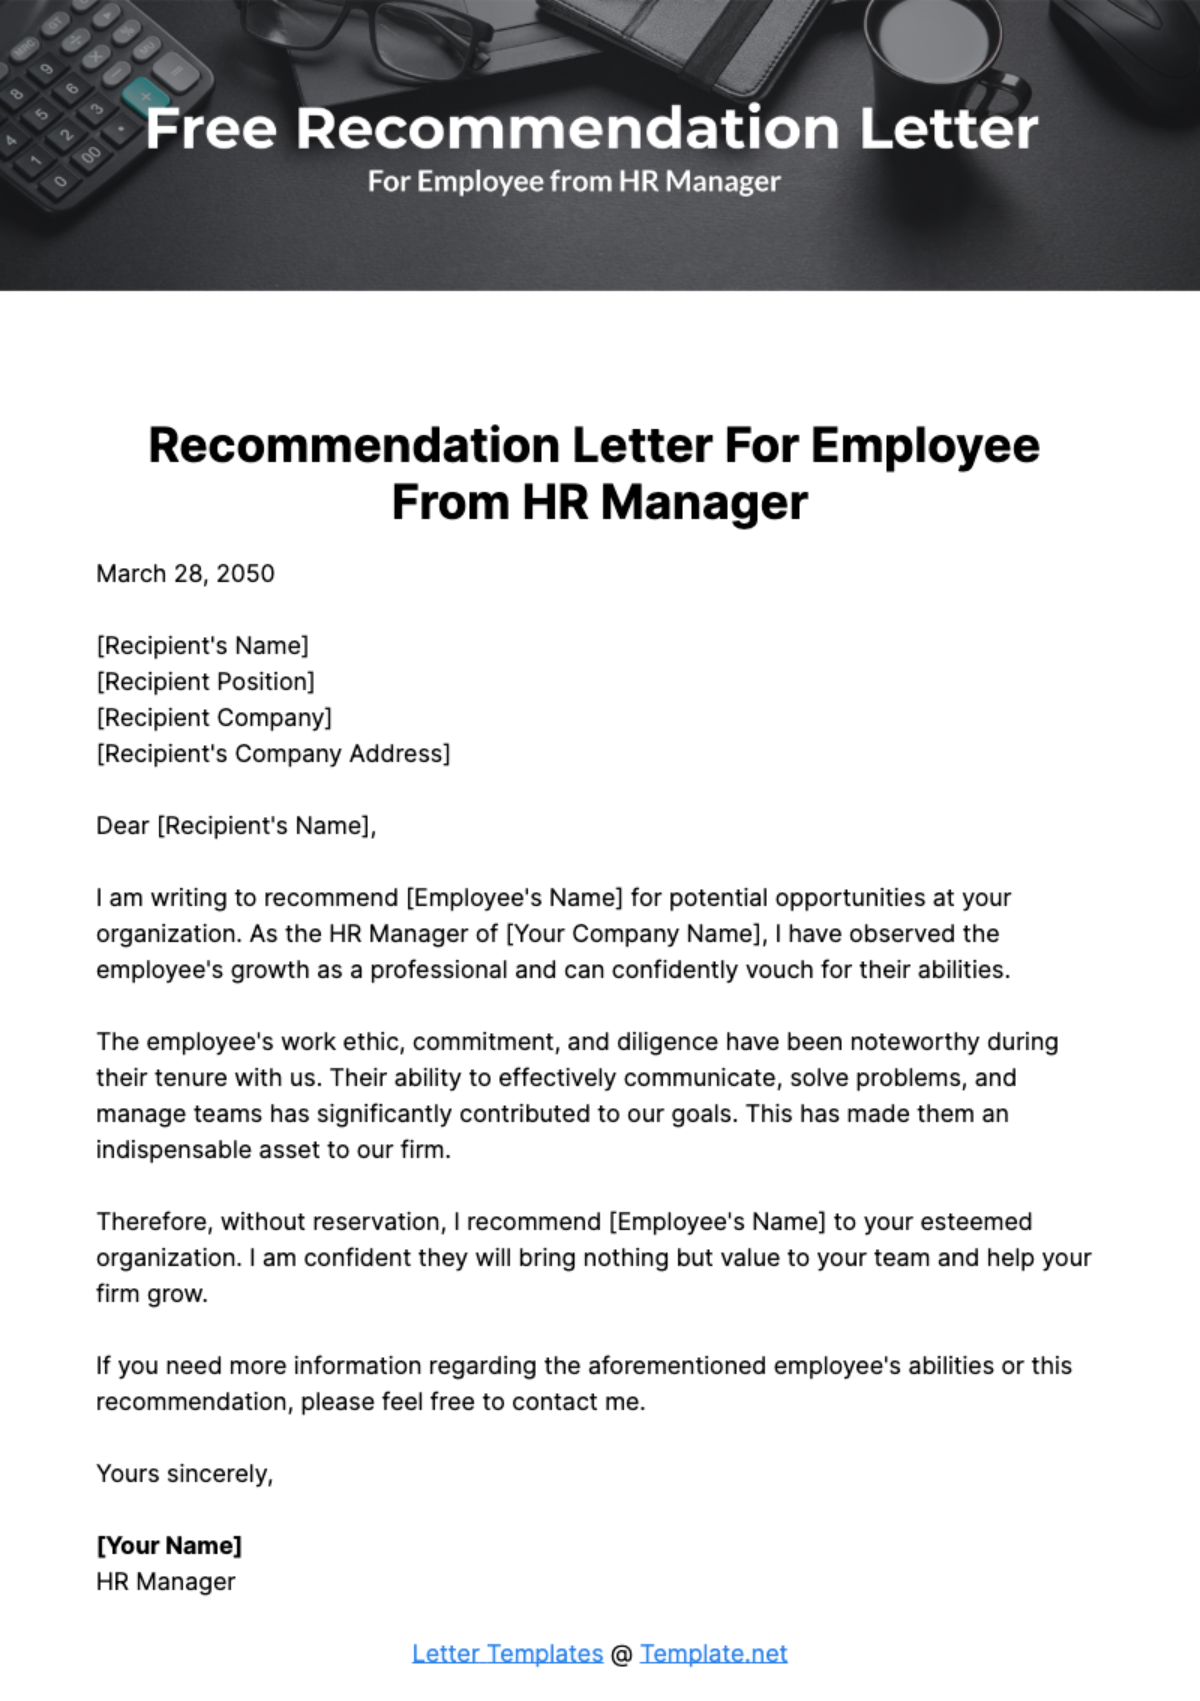 Free Recommendation Letter for Employee from HR Manager Template